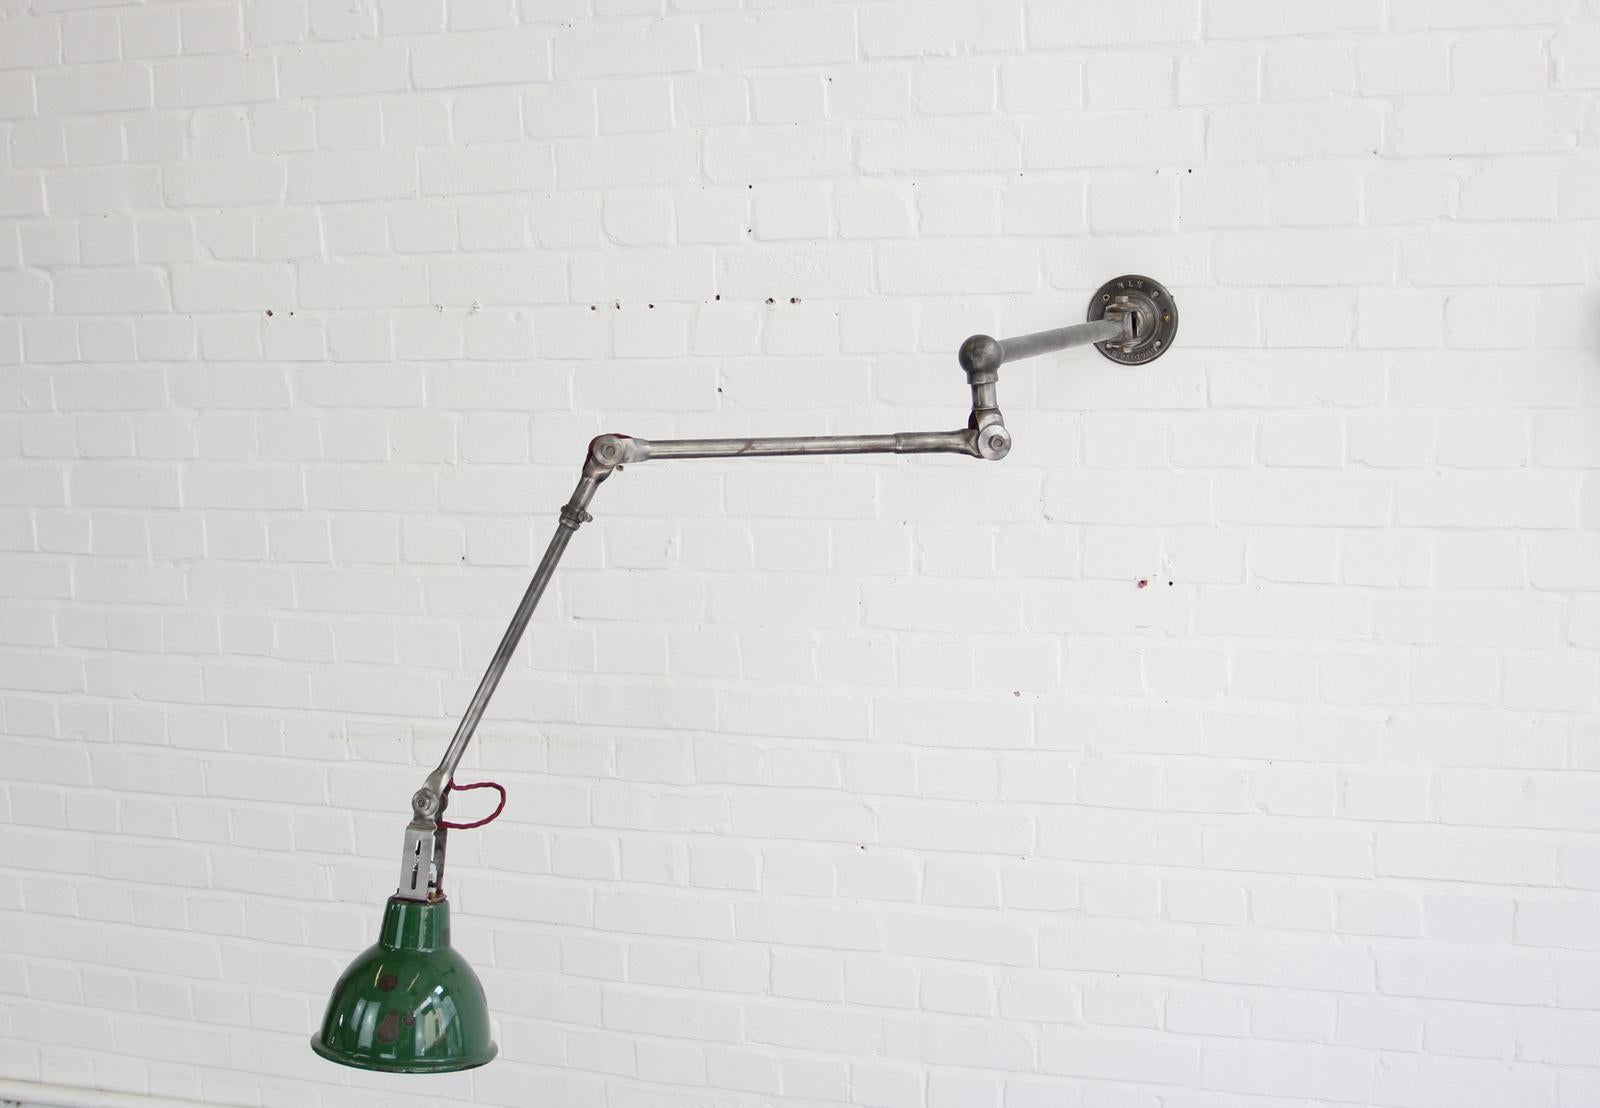 Large industrial task lamp by Dugdills, circa 1930s

- Vitreous green enamel shade
- Tubular steel articulated arms
- Wires directly into a wall or ceiling feed
- Debossed branding on the base
- Takes B22 fitting bulbs
- Inline switch on the